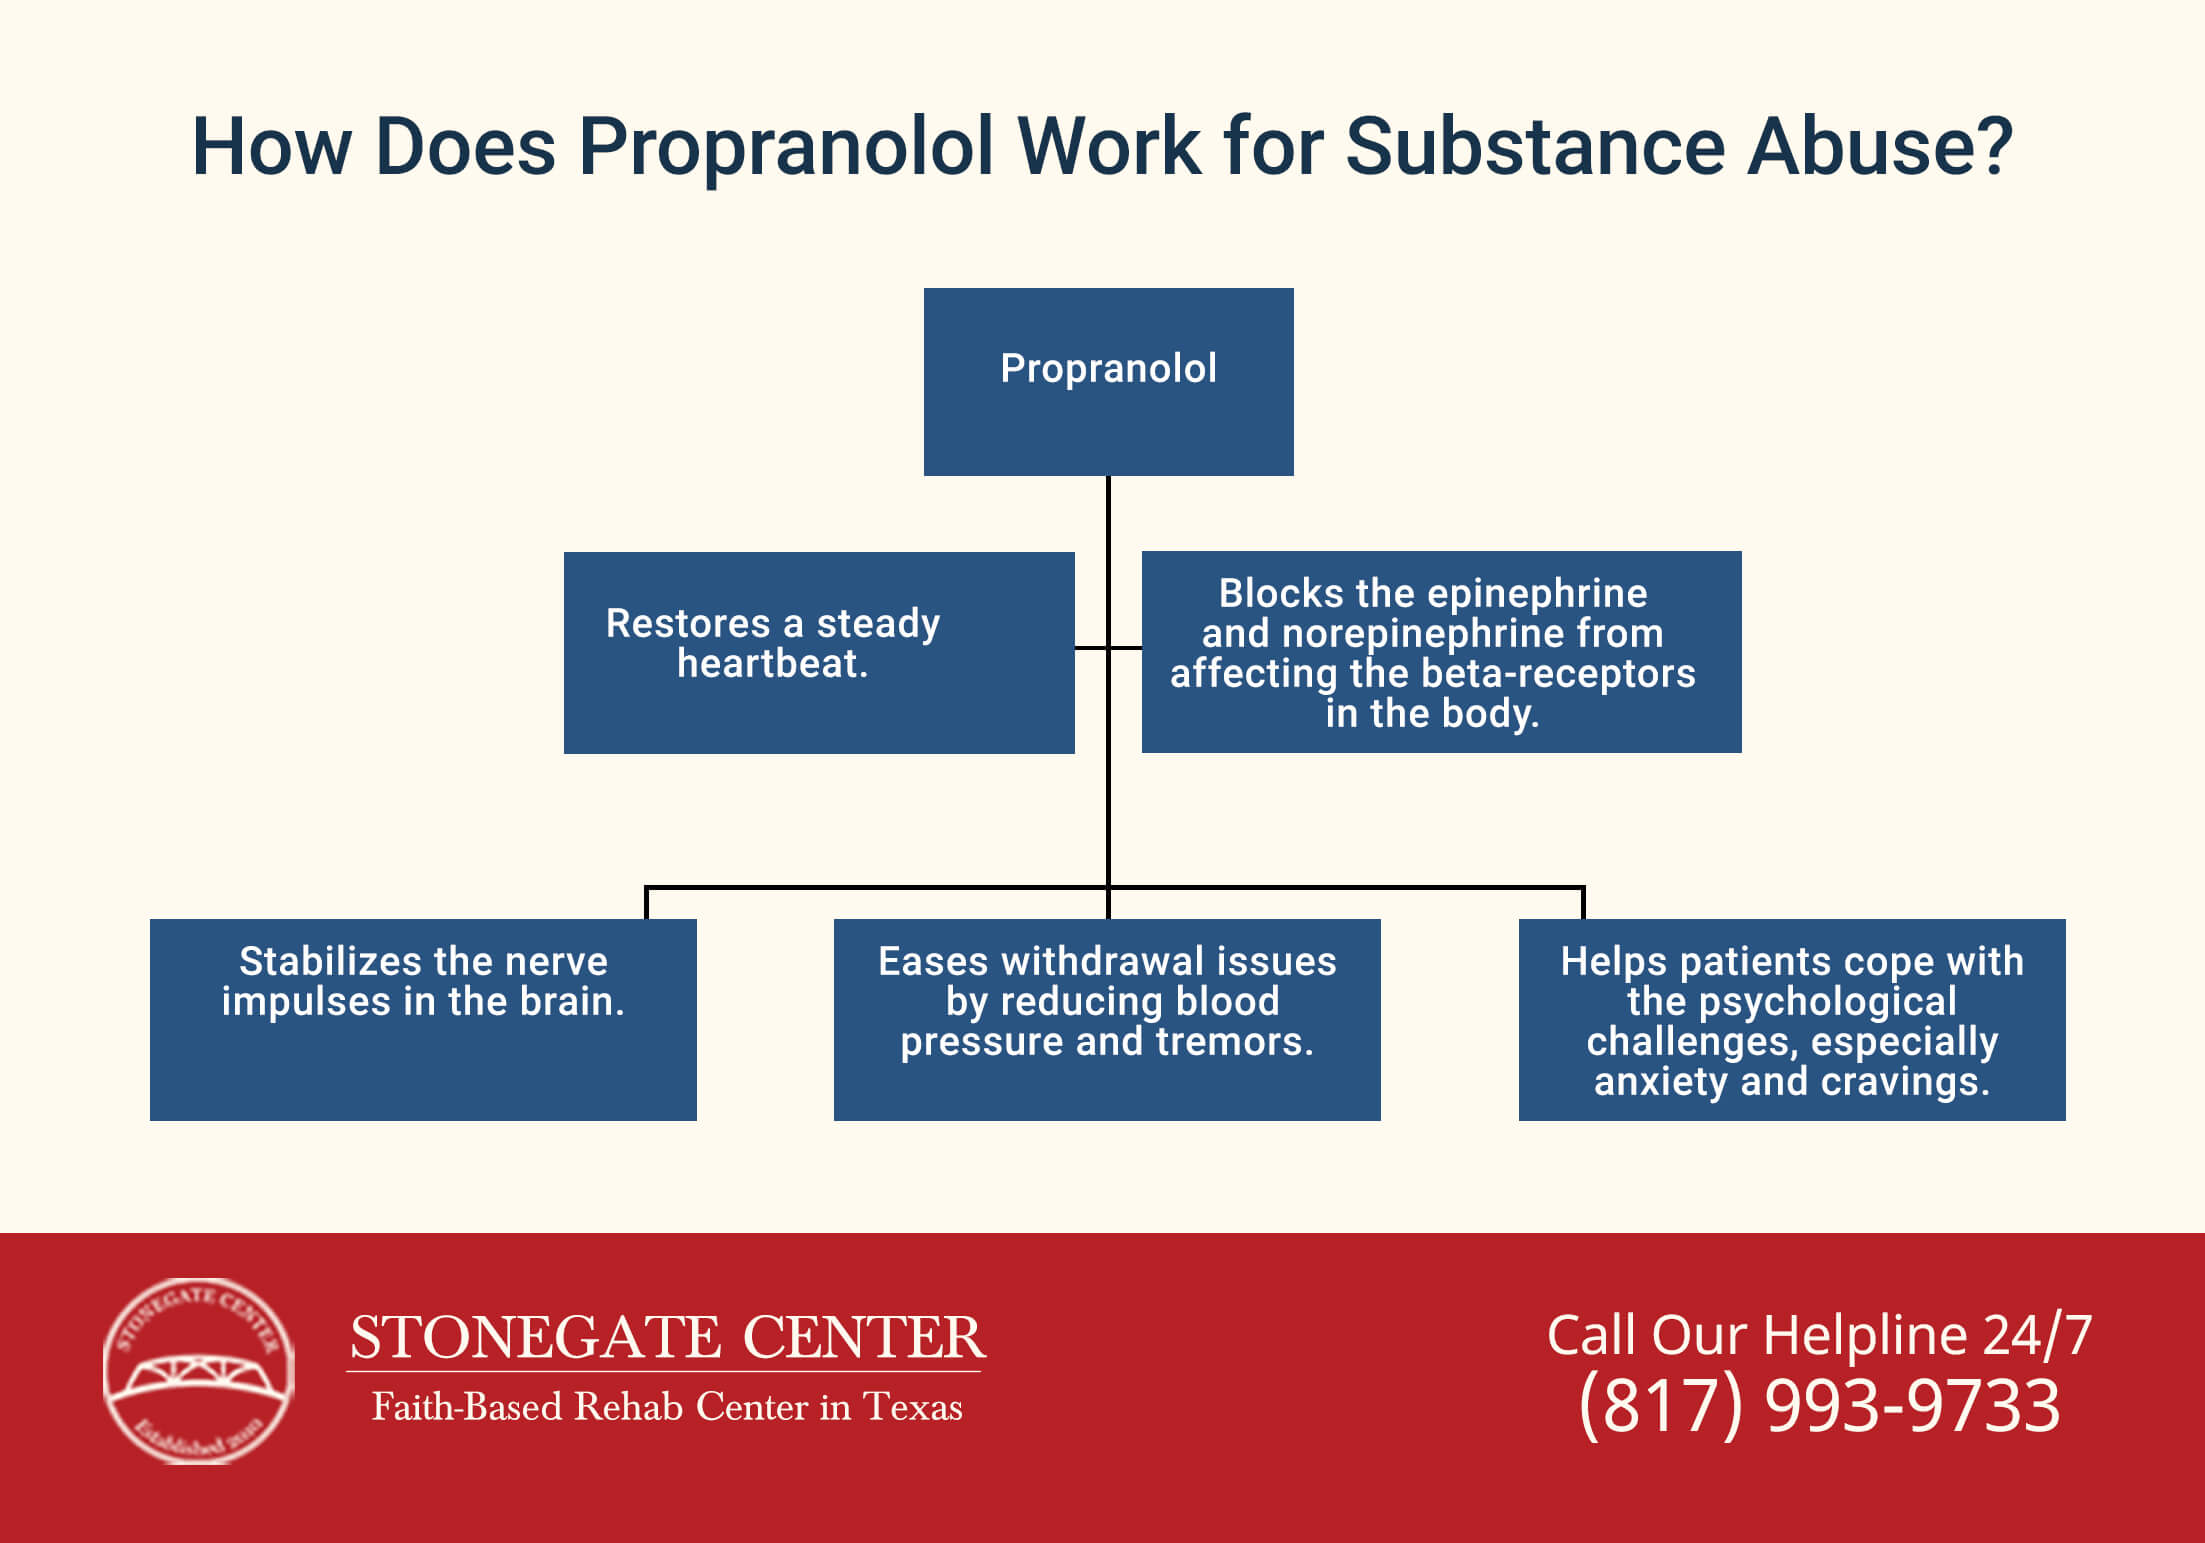 Stonegate Center Blog - Is Propranolol One of the Most Common Medications Given at Detox Centers? - How Does Propranolol Works